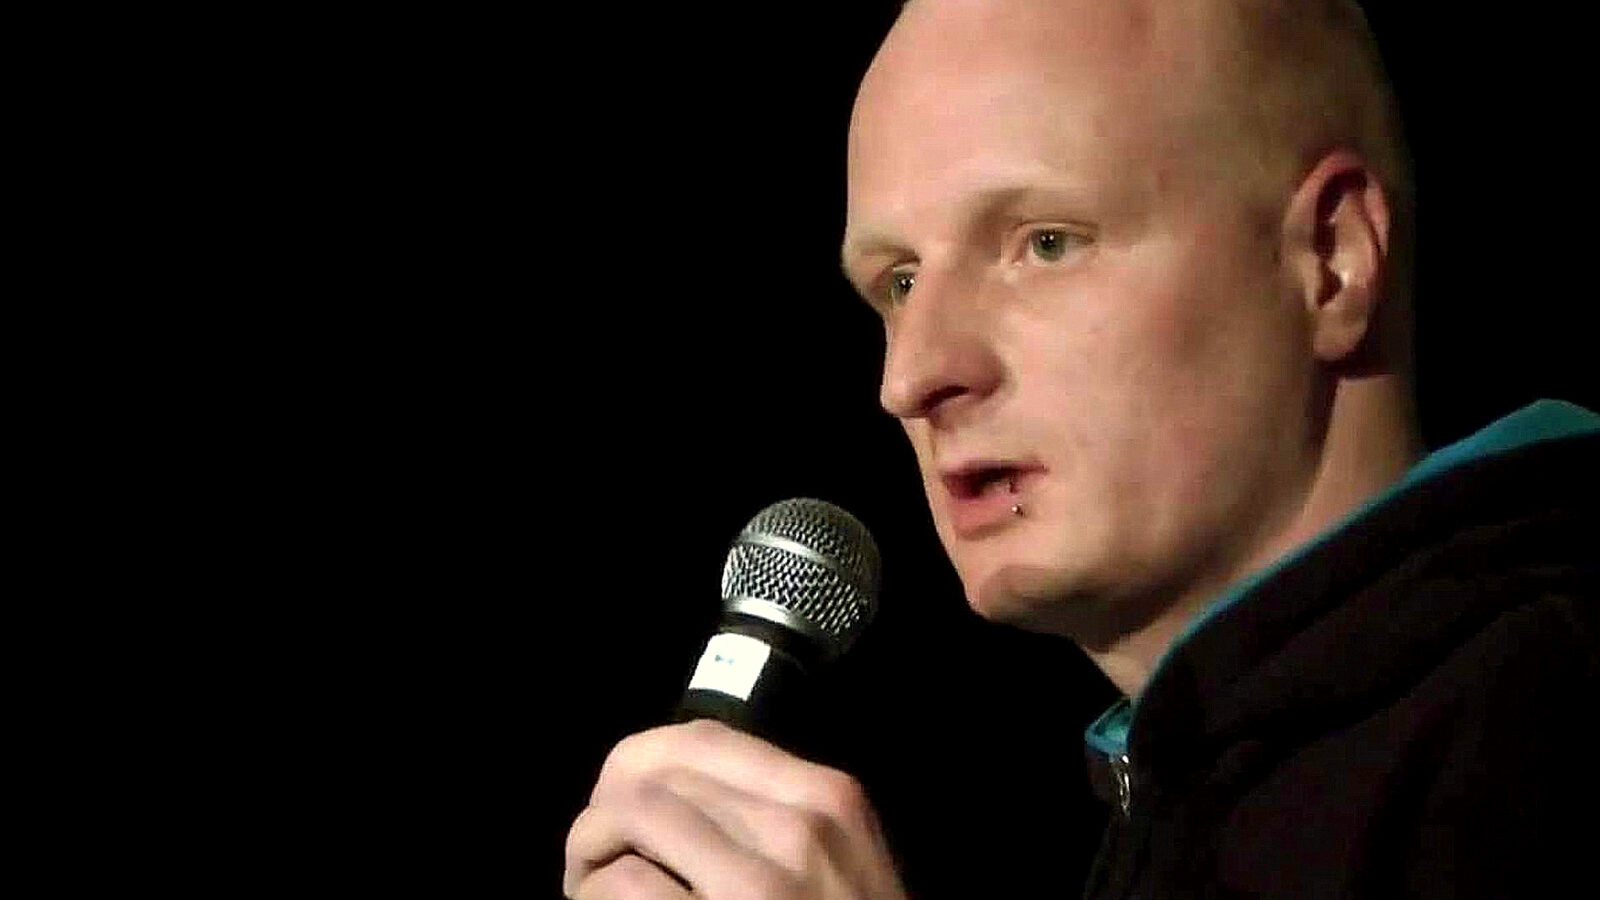 Andre Meister, a journalist with Netzpolitik.org, has been charged with treason. Photograph: YouTube